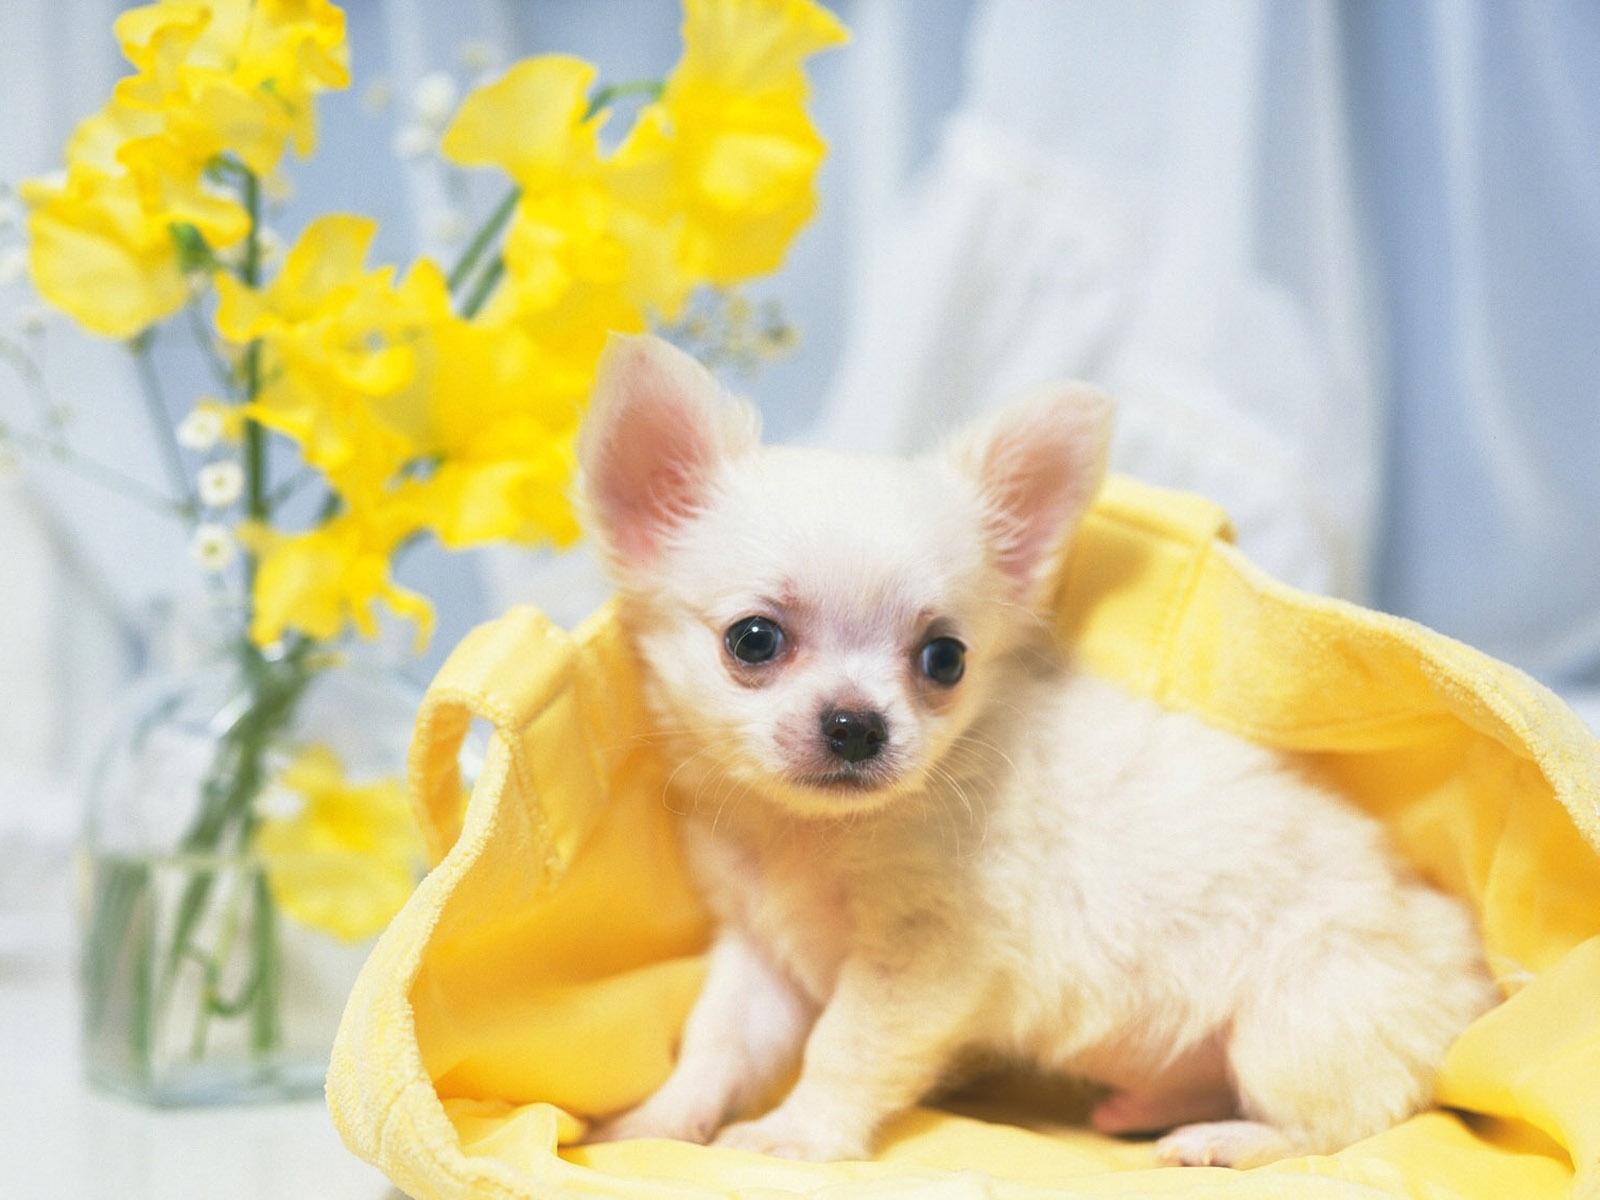 Pink Puppy Background Images HD Pictures and Wallpaper For Free Download   Pngtree